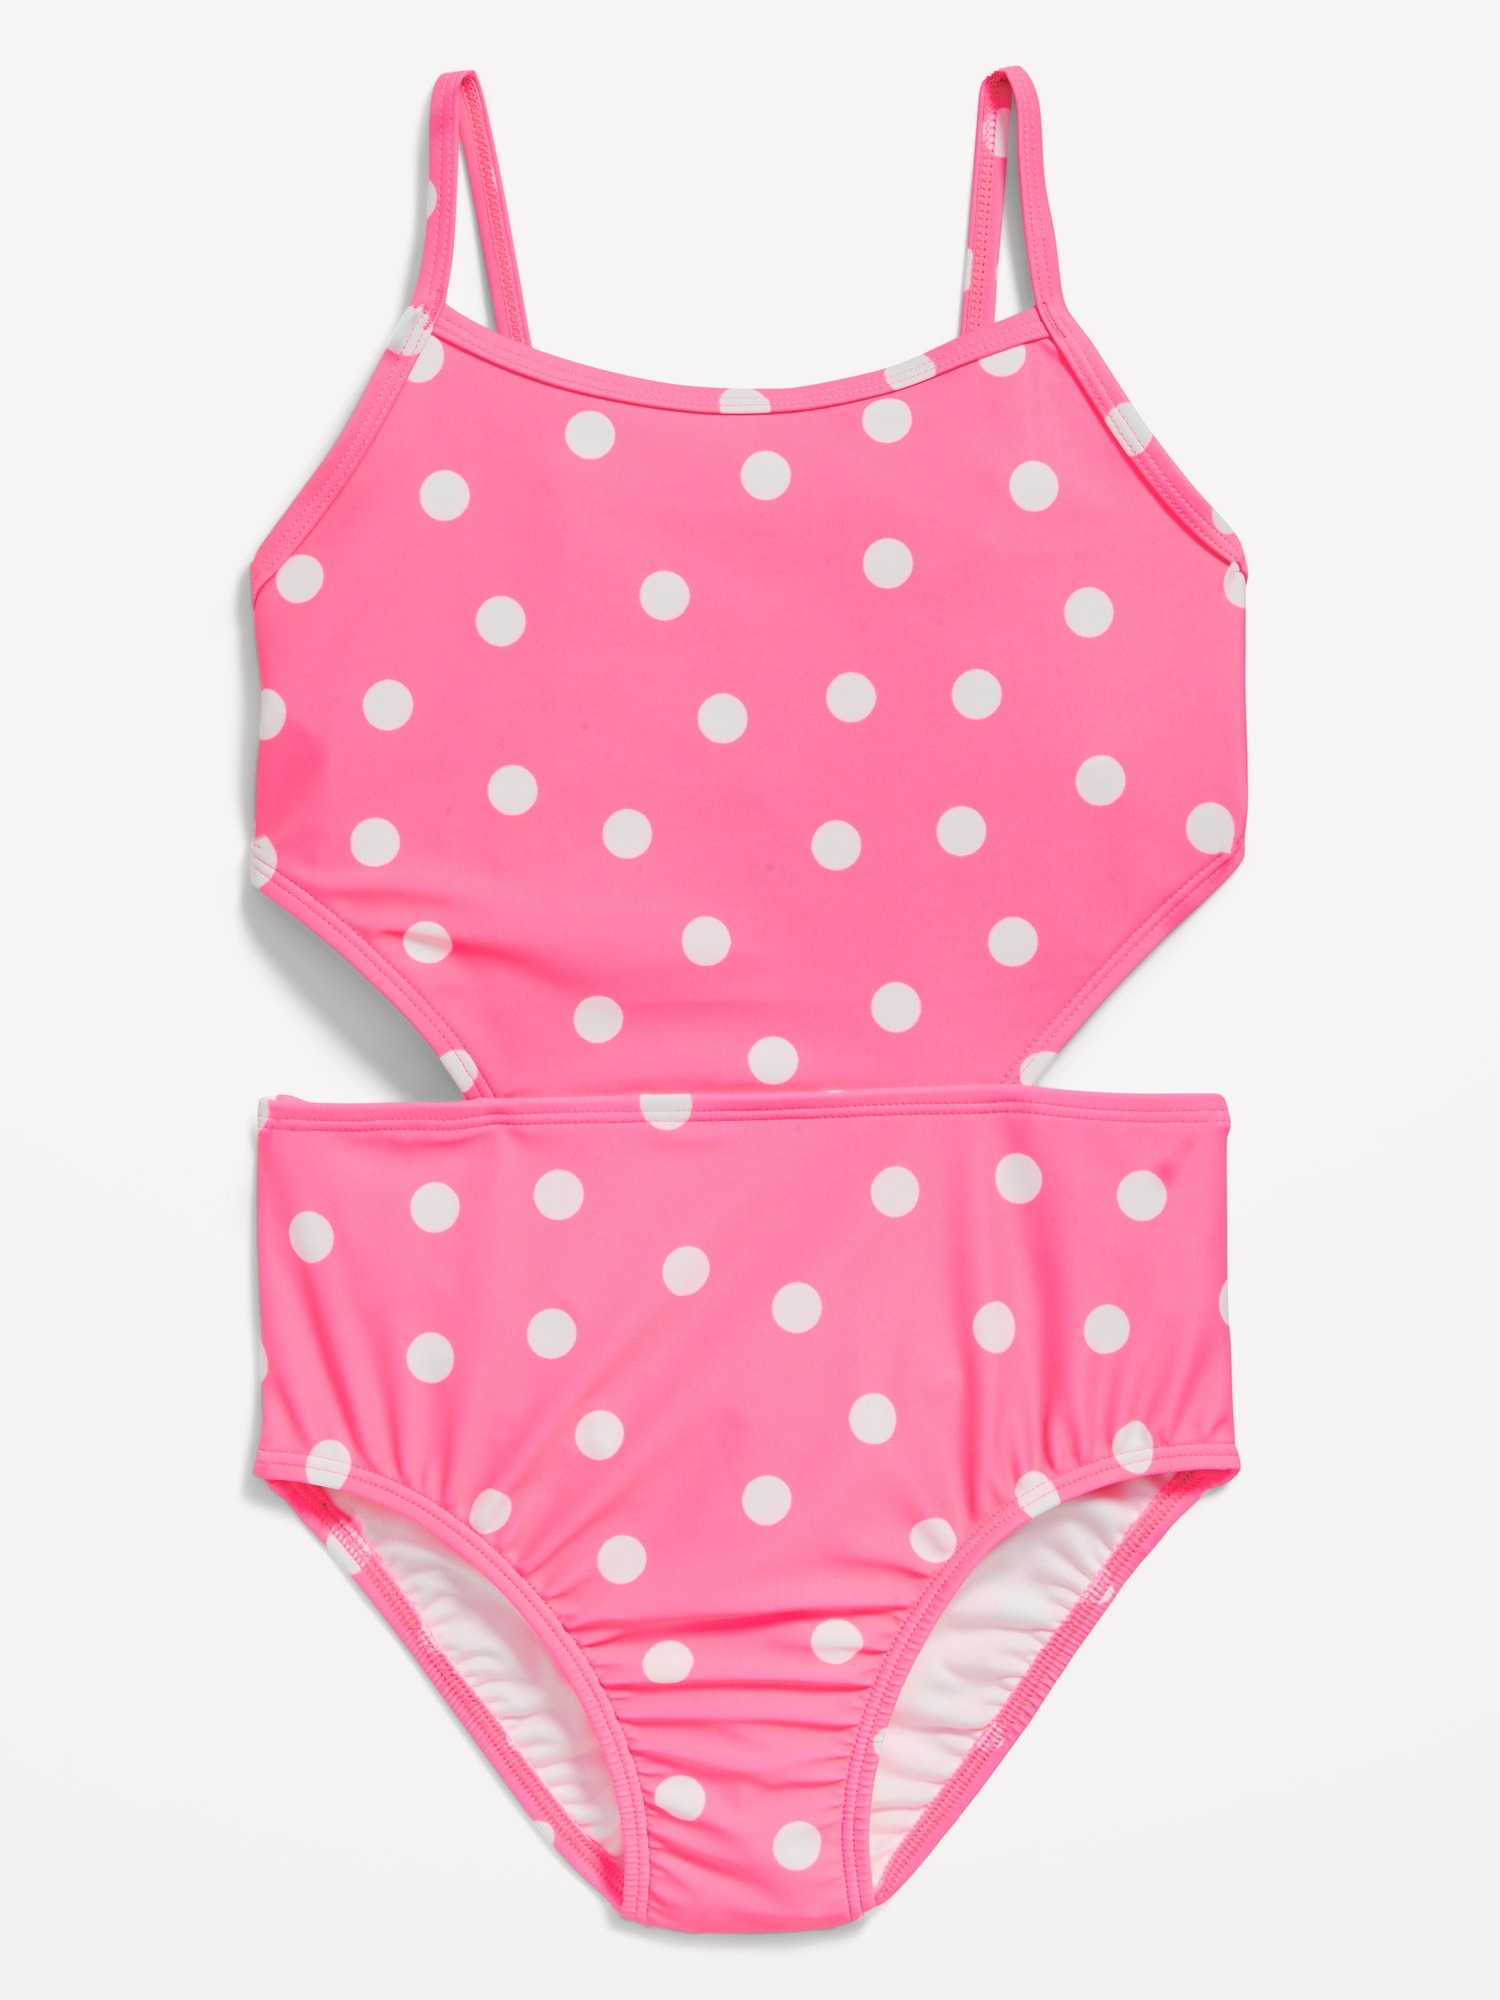 Old Navy Patterned Cut-Out-Waist One-Piece Swimsuit for Girls pink. 1